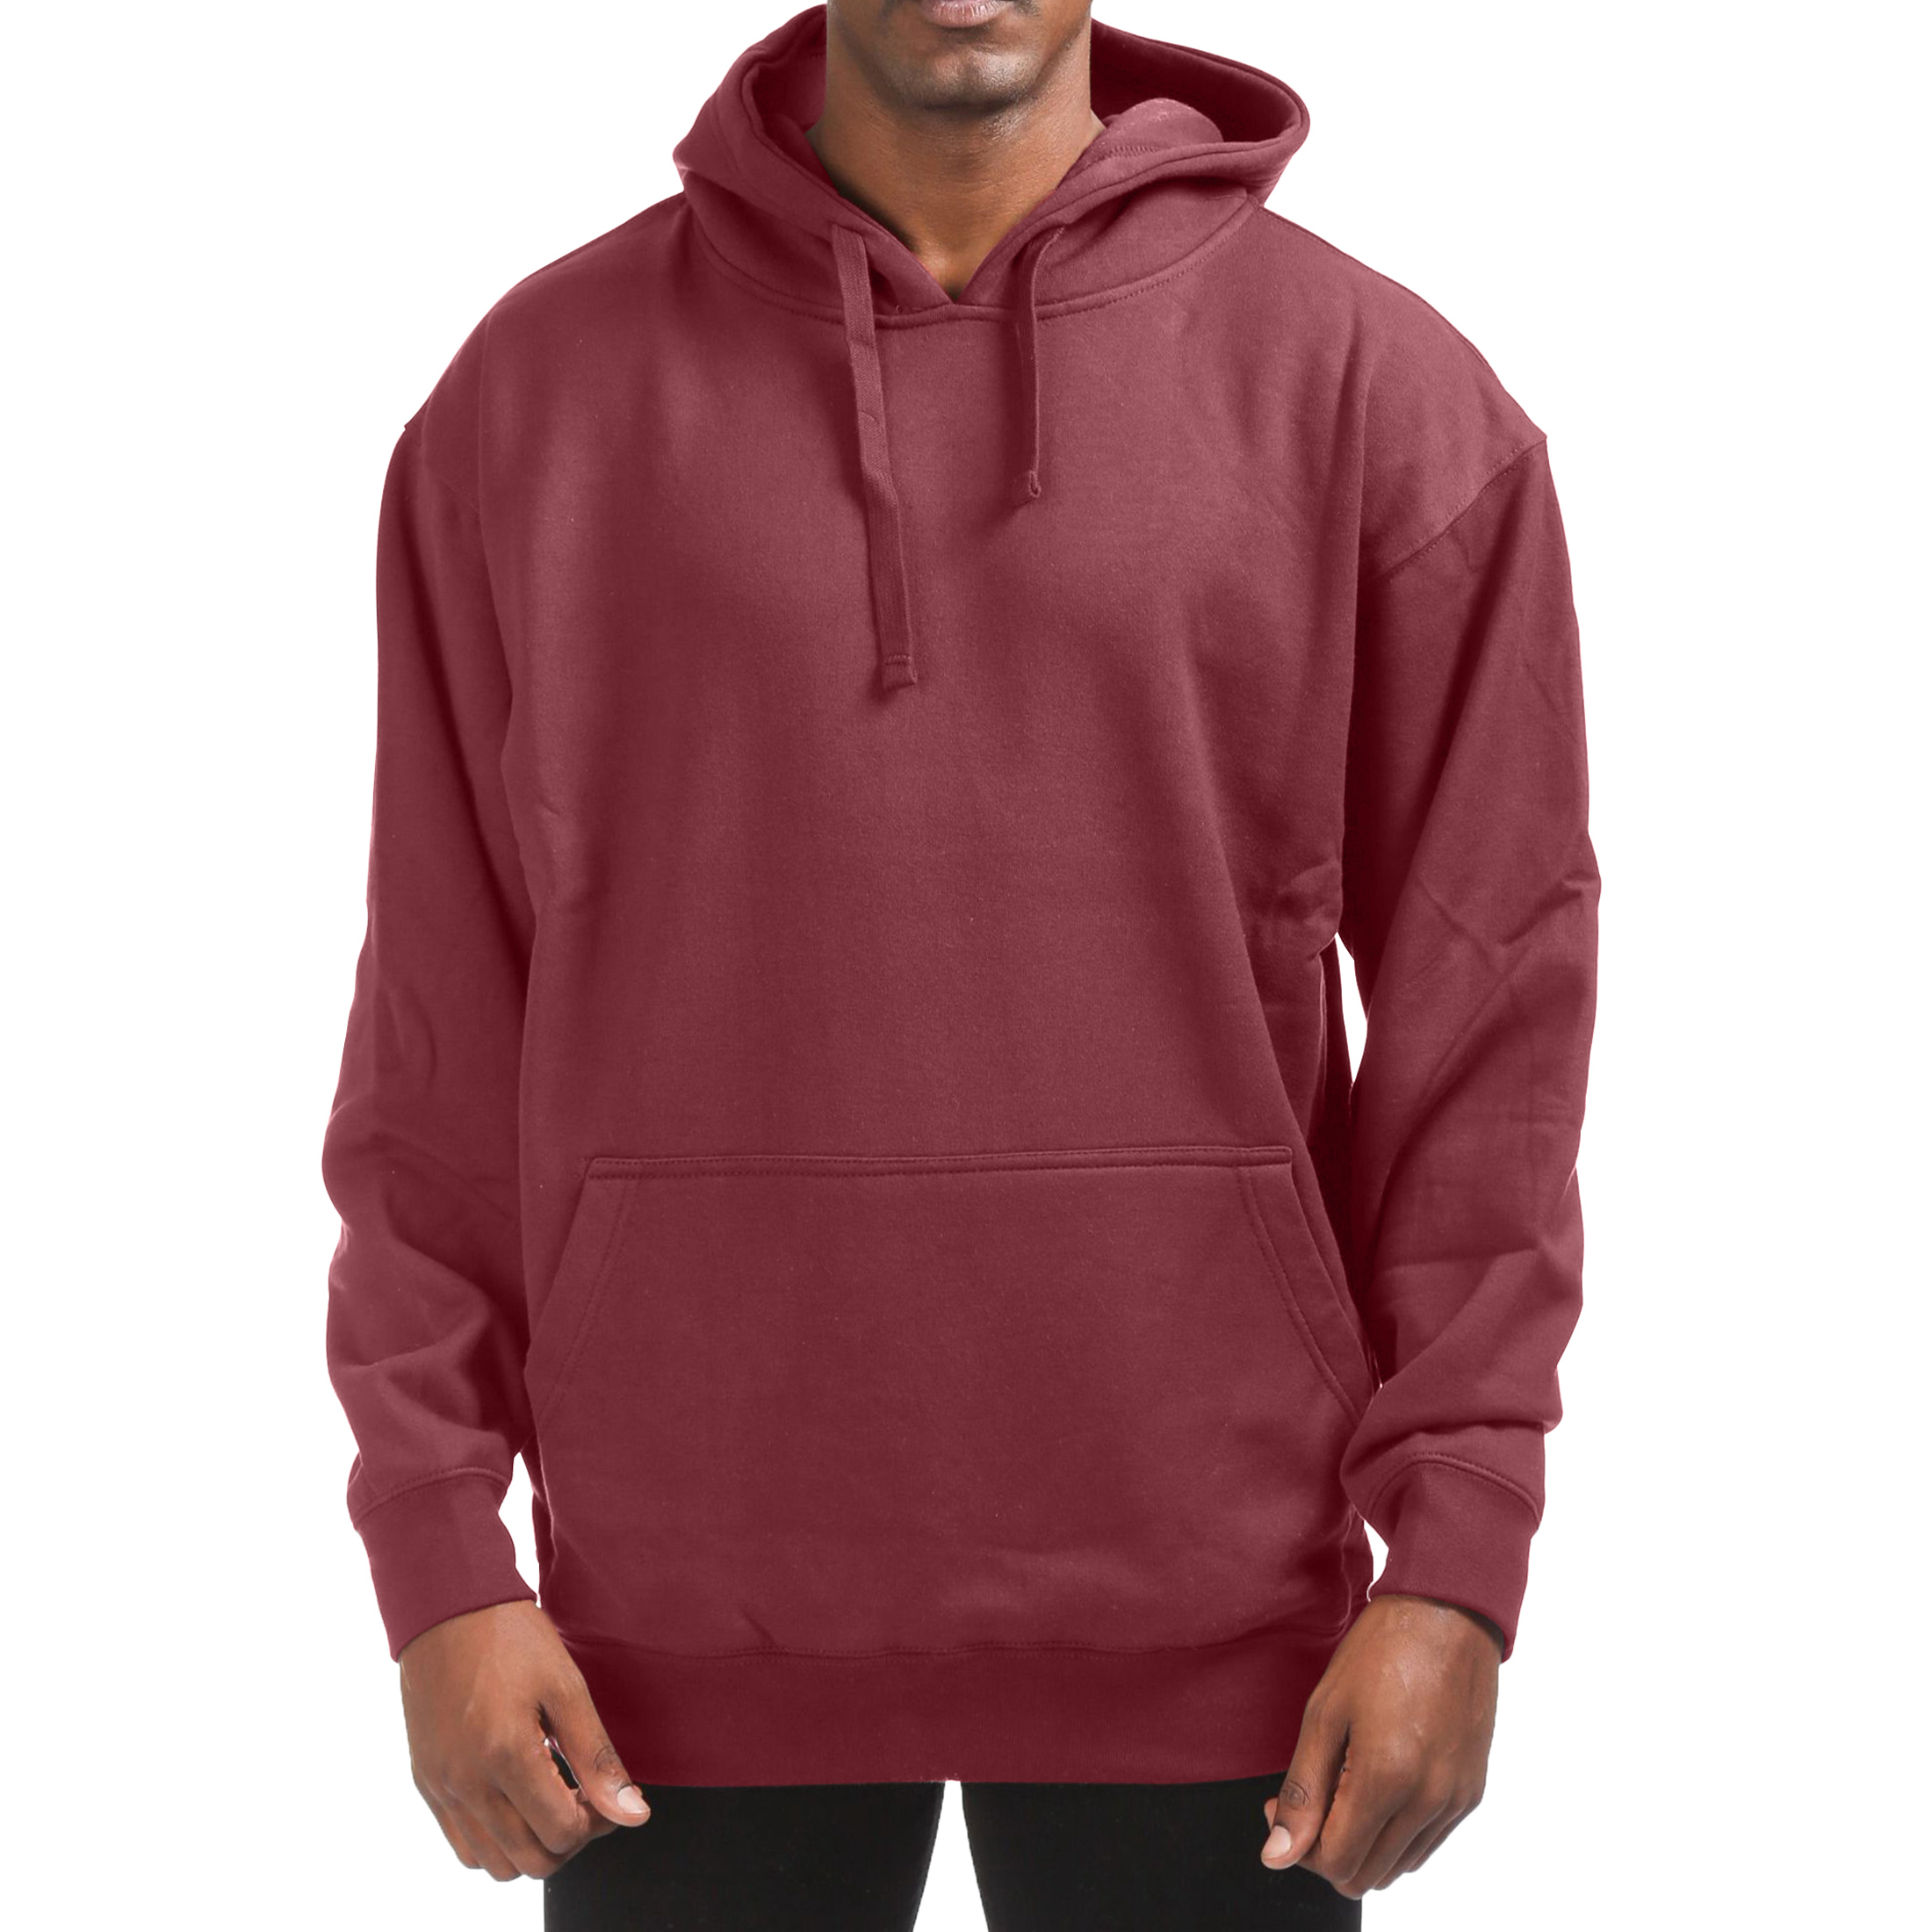 Men's Cotton-Blend Fleece Pullover Hoodie With Pocket (Big & Tall Sizes Available) - Burgundy, Large